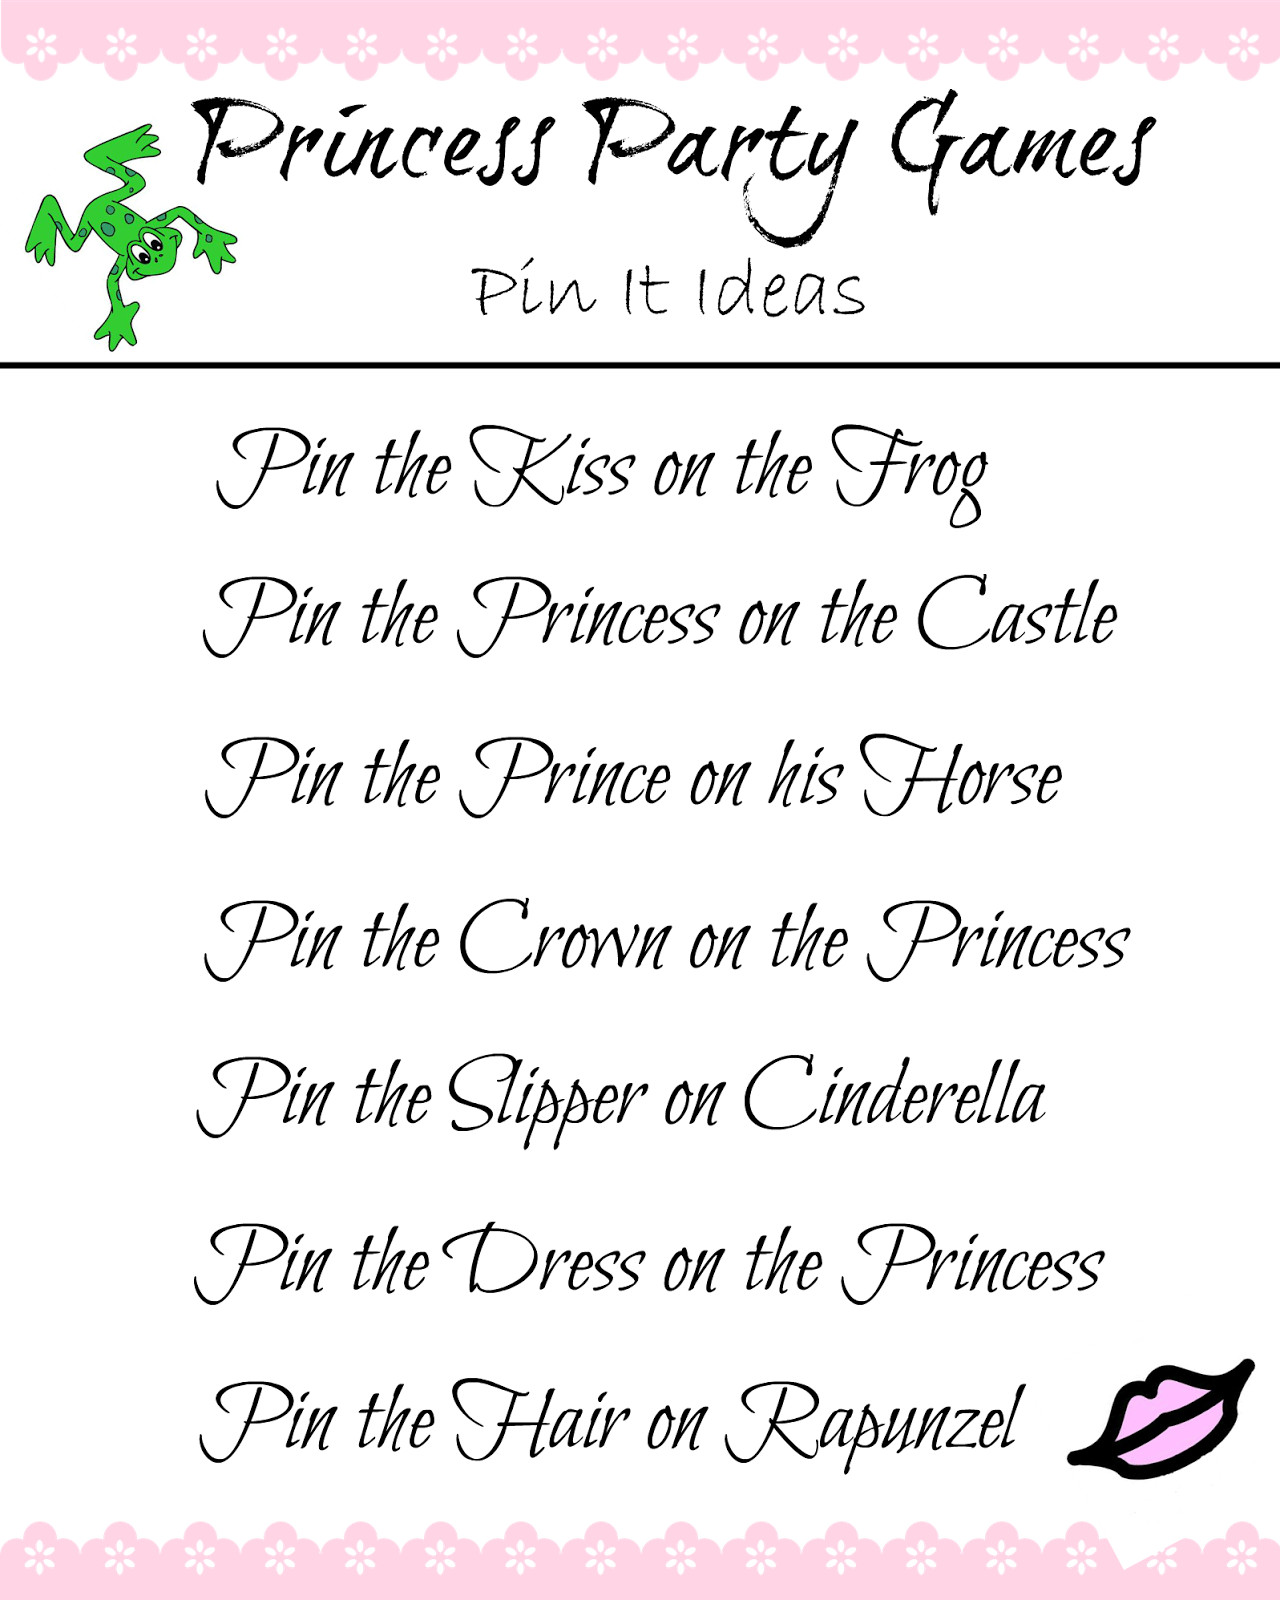 Princess Birthday Party Games
 It s a Princess Thing Pin the Princess Party Game Ideas